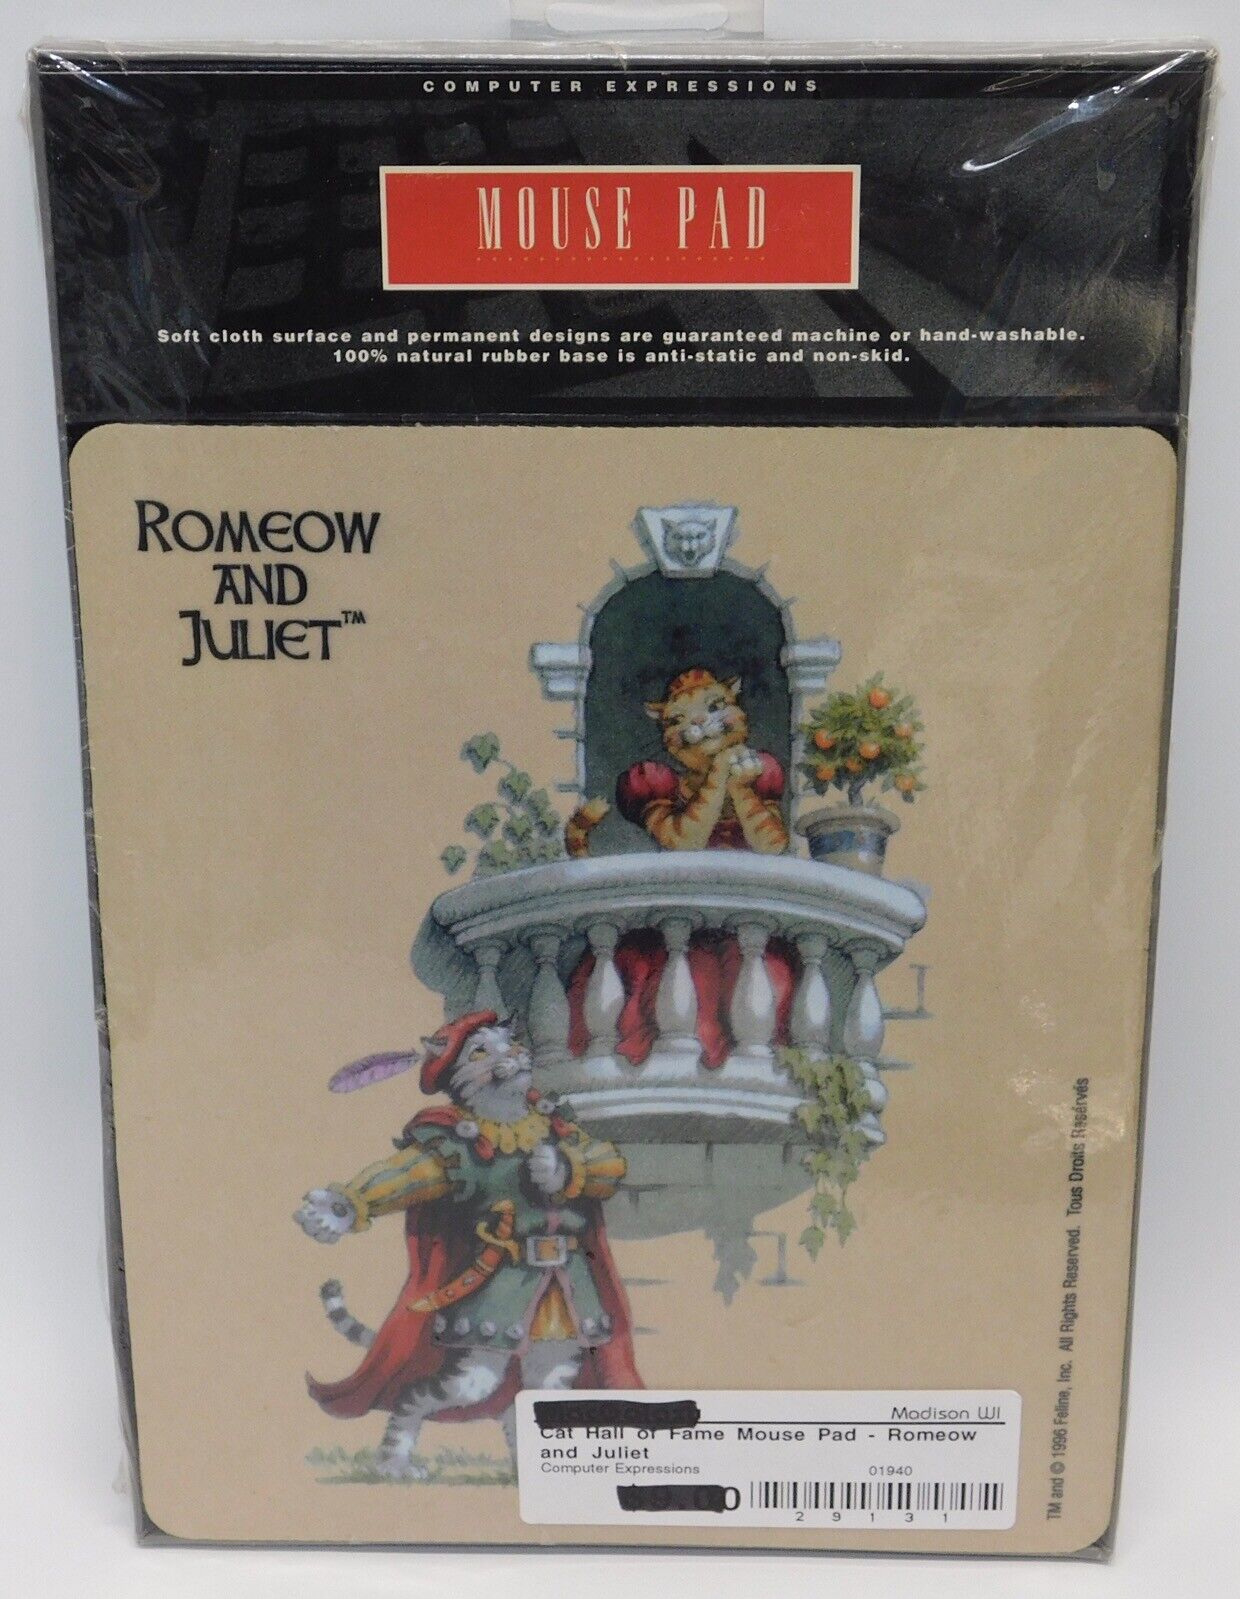 Vintage Mouse Pad: NIB - Cat Hall of Fame - 1996 Romeow and Juliet